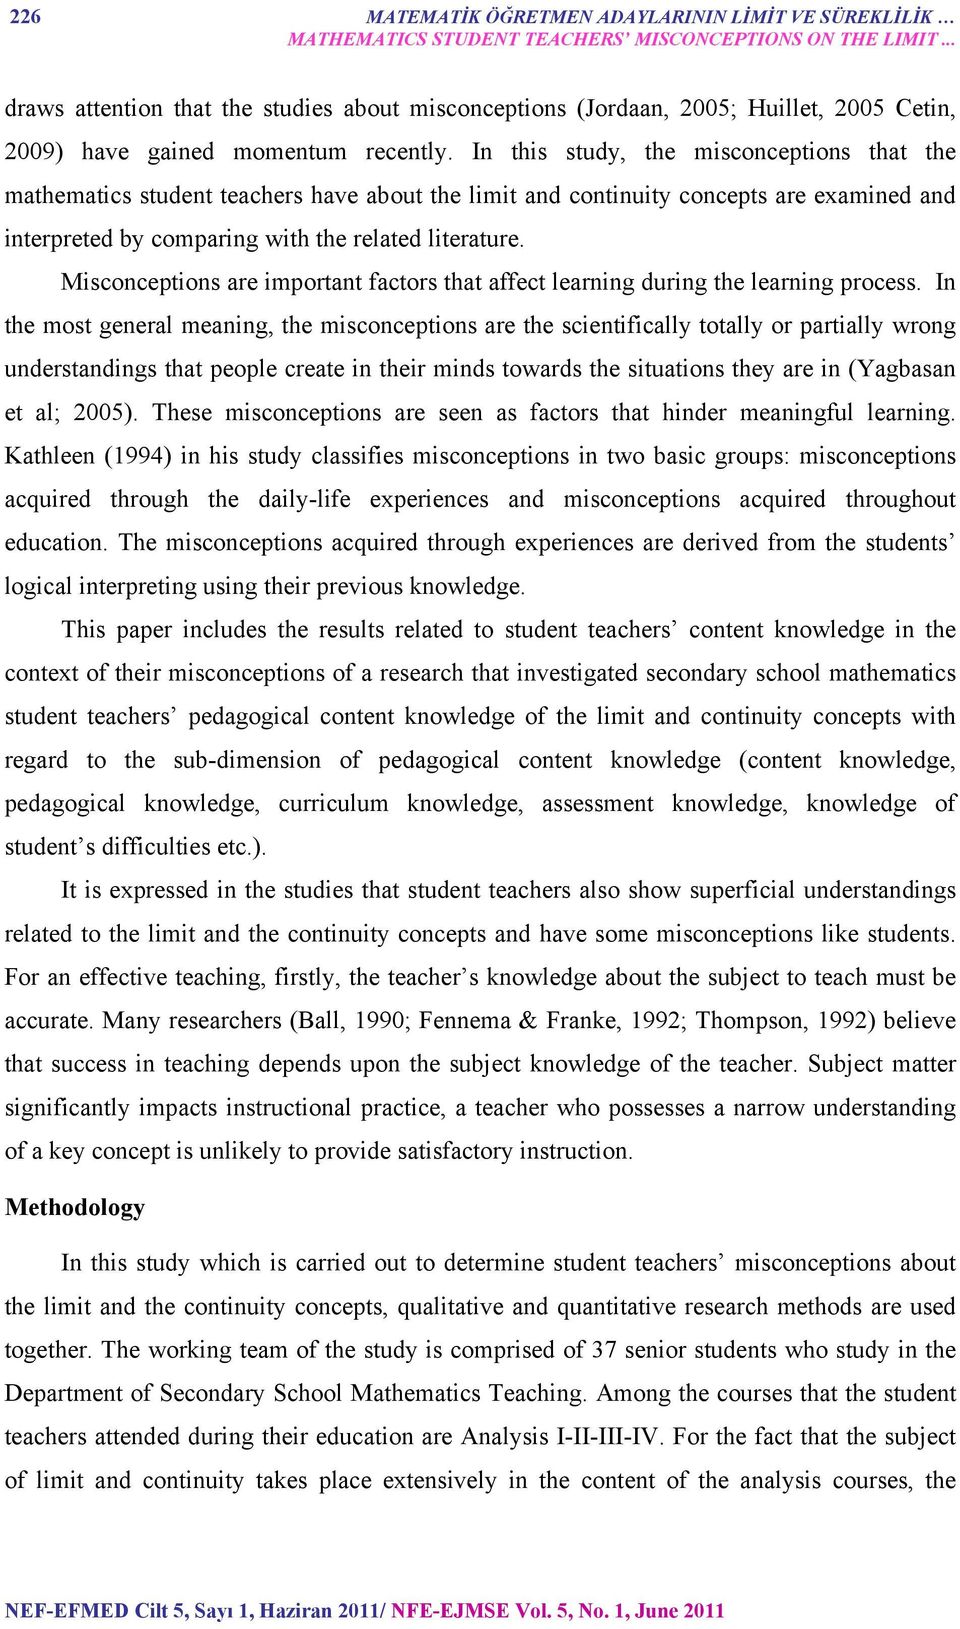 In this study, the misconceptions that the mathematics student teachers have about the limit and continuity concepts are examined and interpreted by comparing with the related literature.